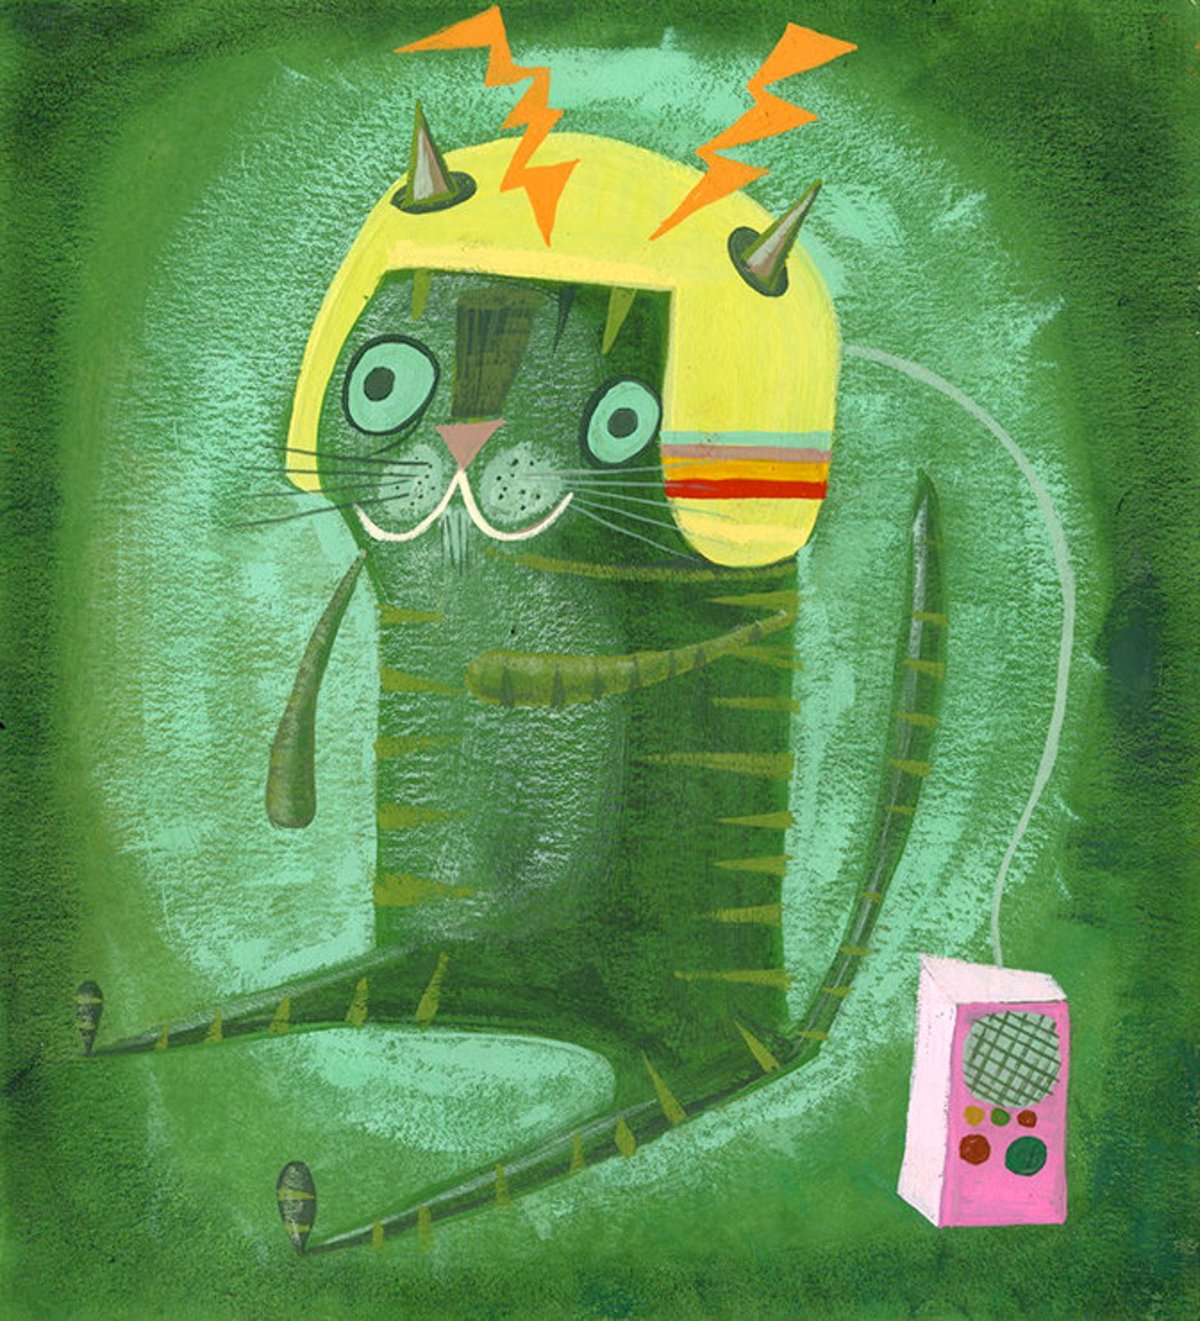 Image of Simon in his communication helmet. Limited edition print.